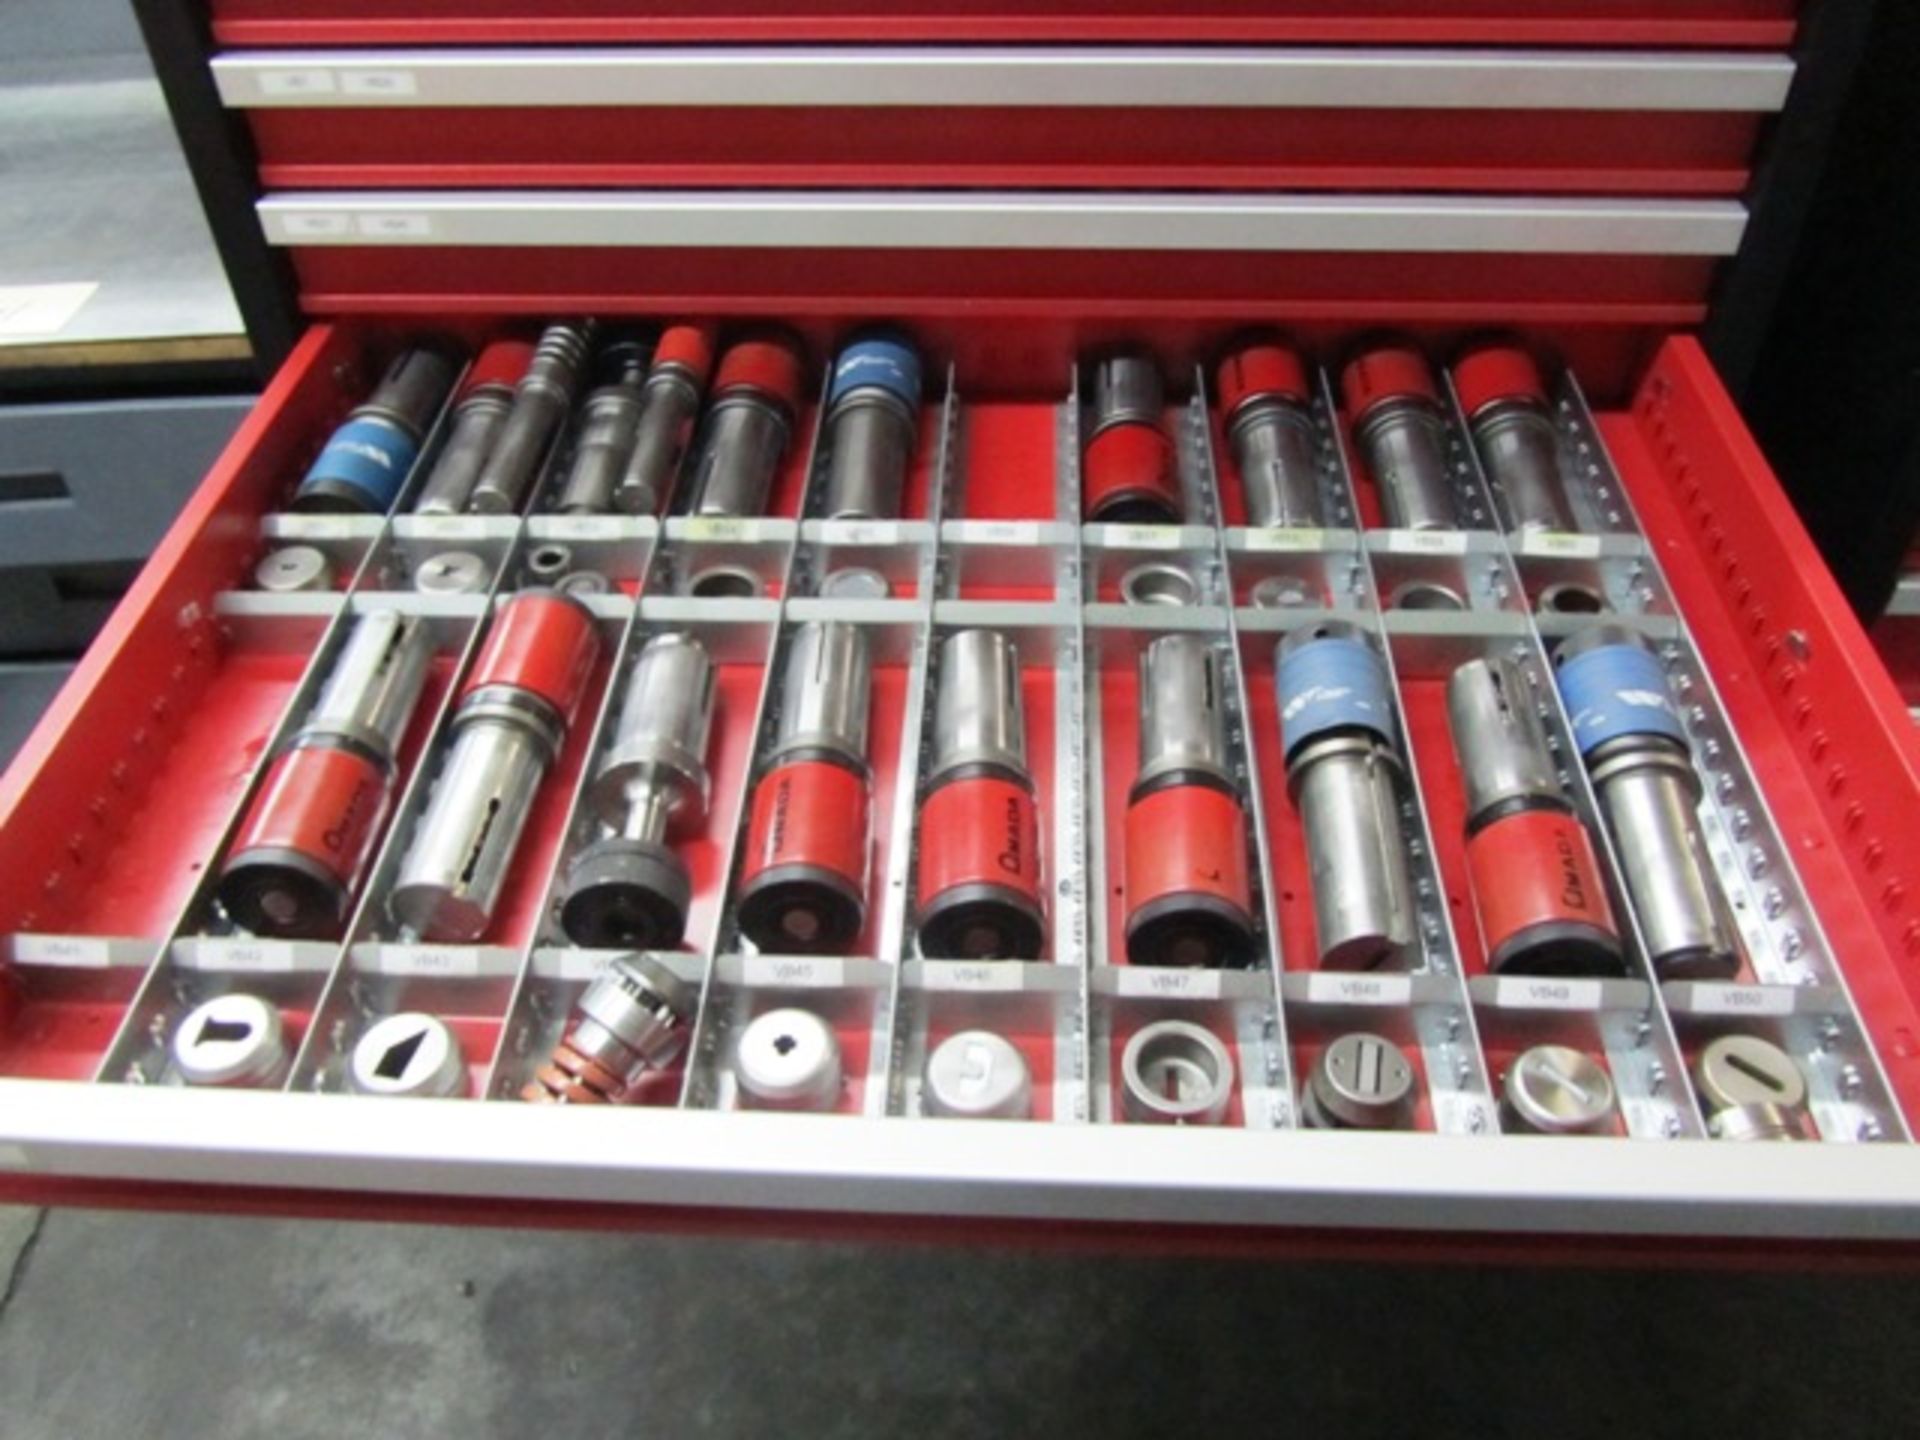 Amada 8 Drawer Portable Tool Cabinet with Turret Punches & Dies - Image 5 of 8